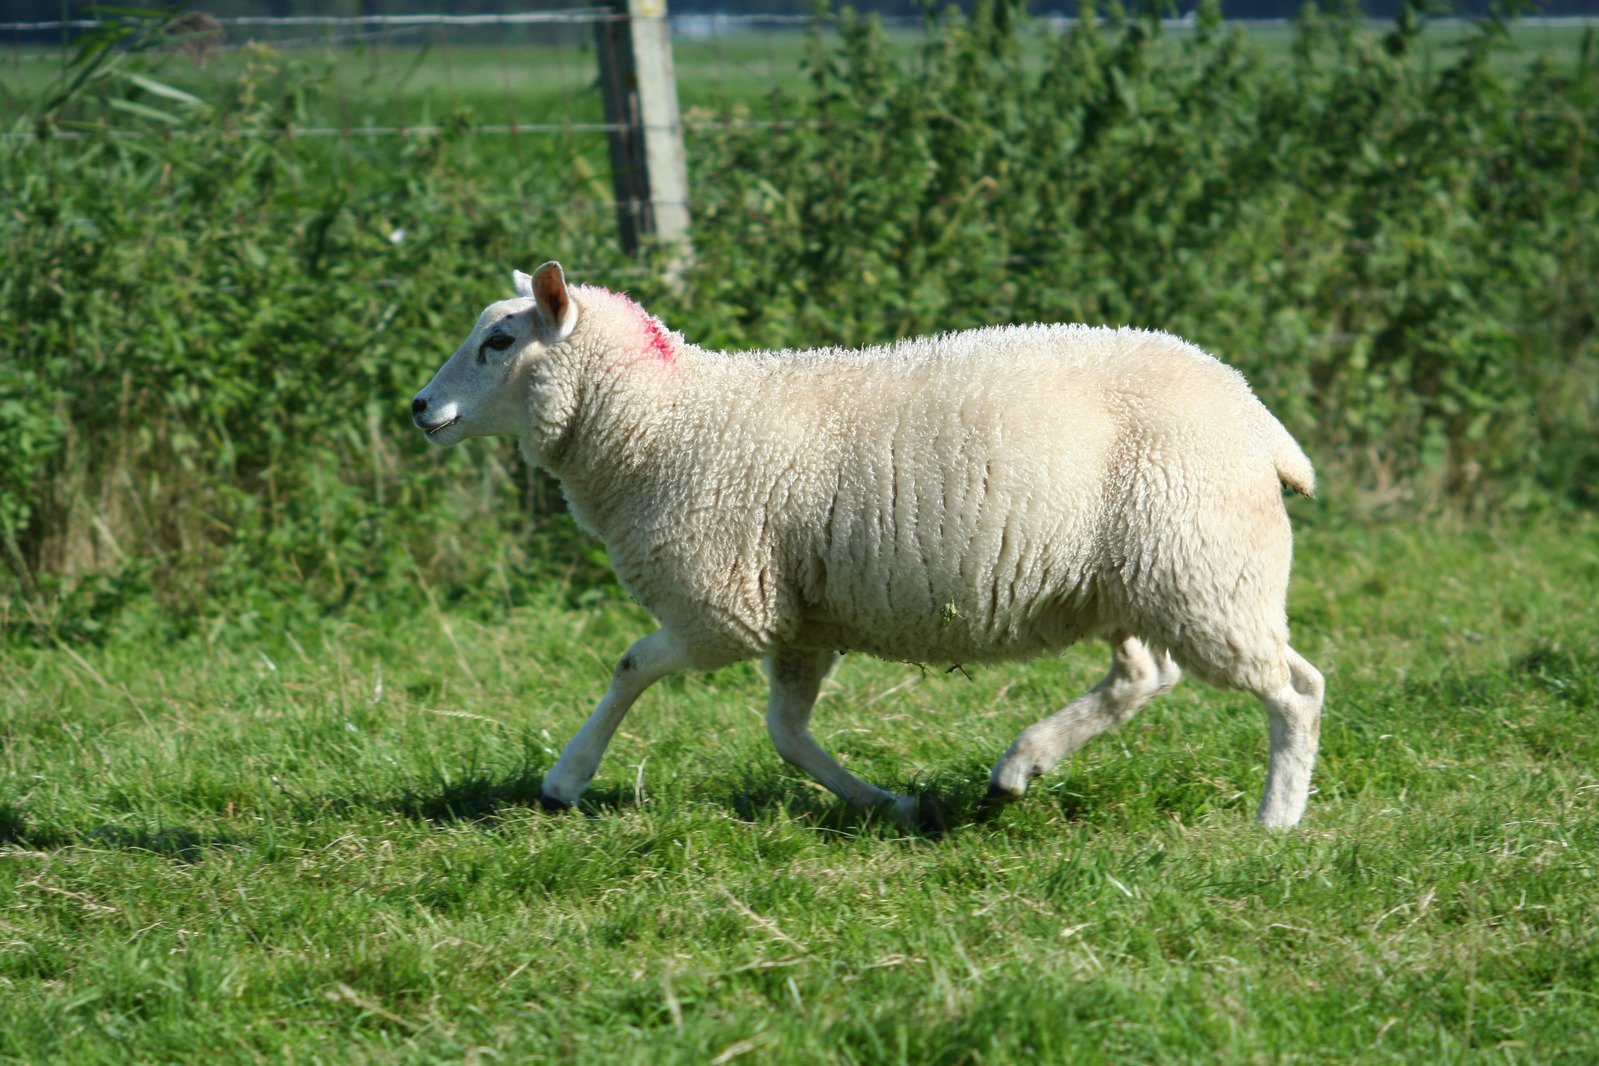 a large sheep is standing in a grass field